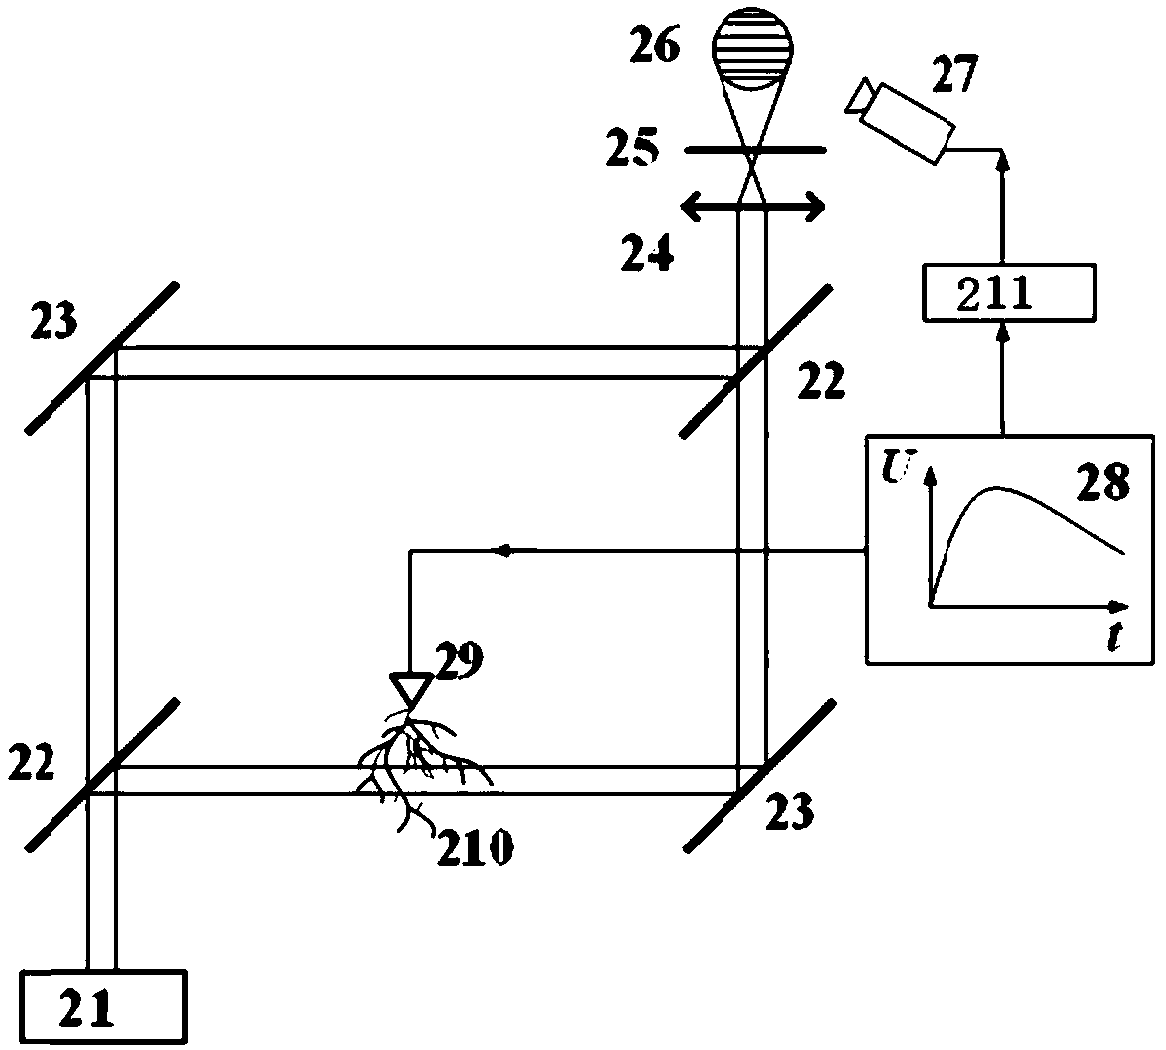 System and method for measuring instantaneous gas density for conversion from long-air-gap streamer discharge to leader discharge